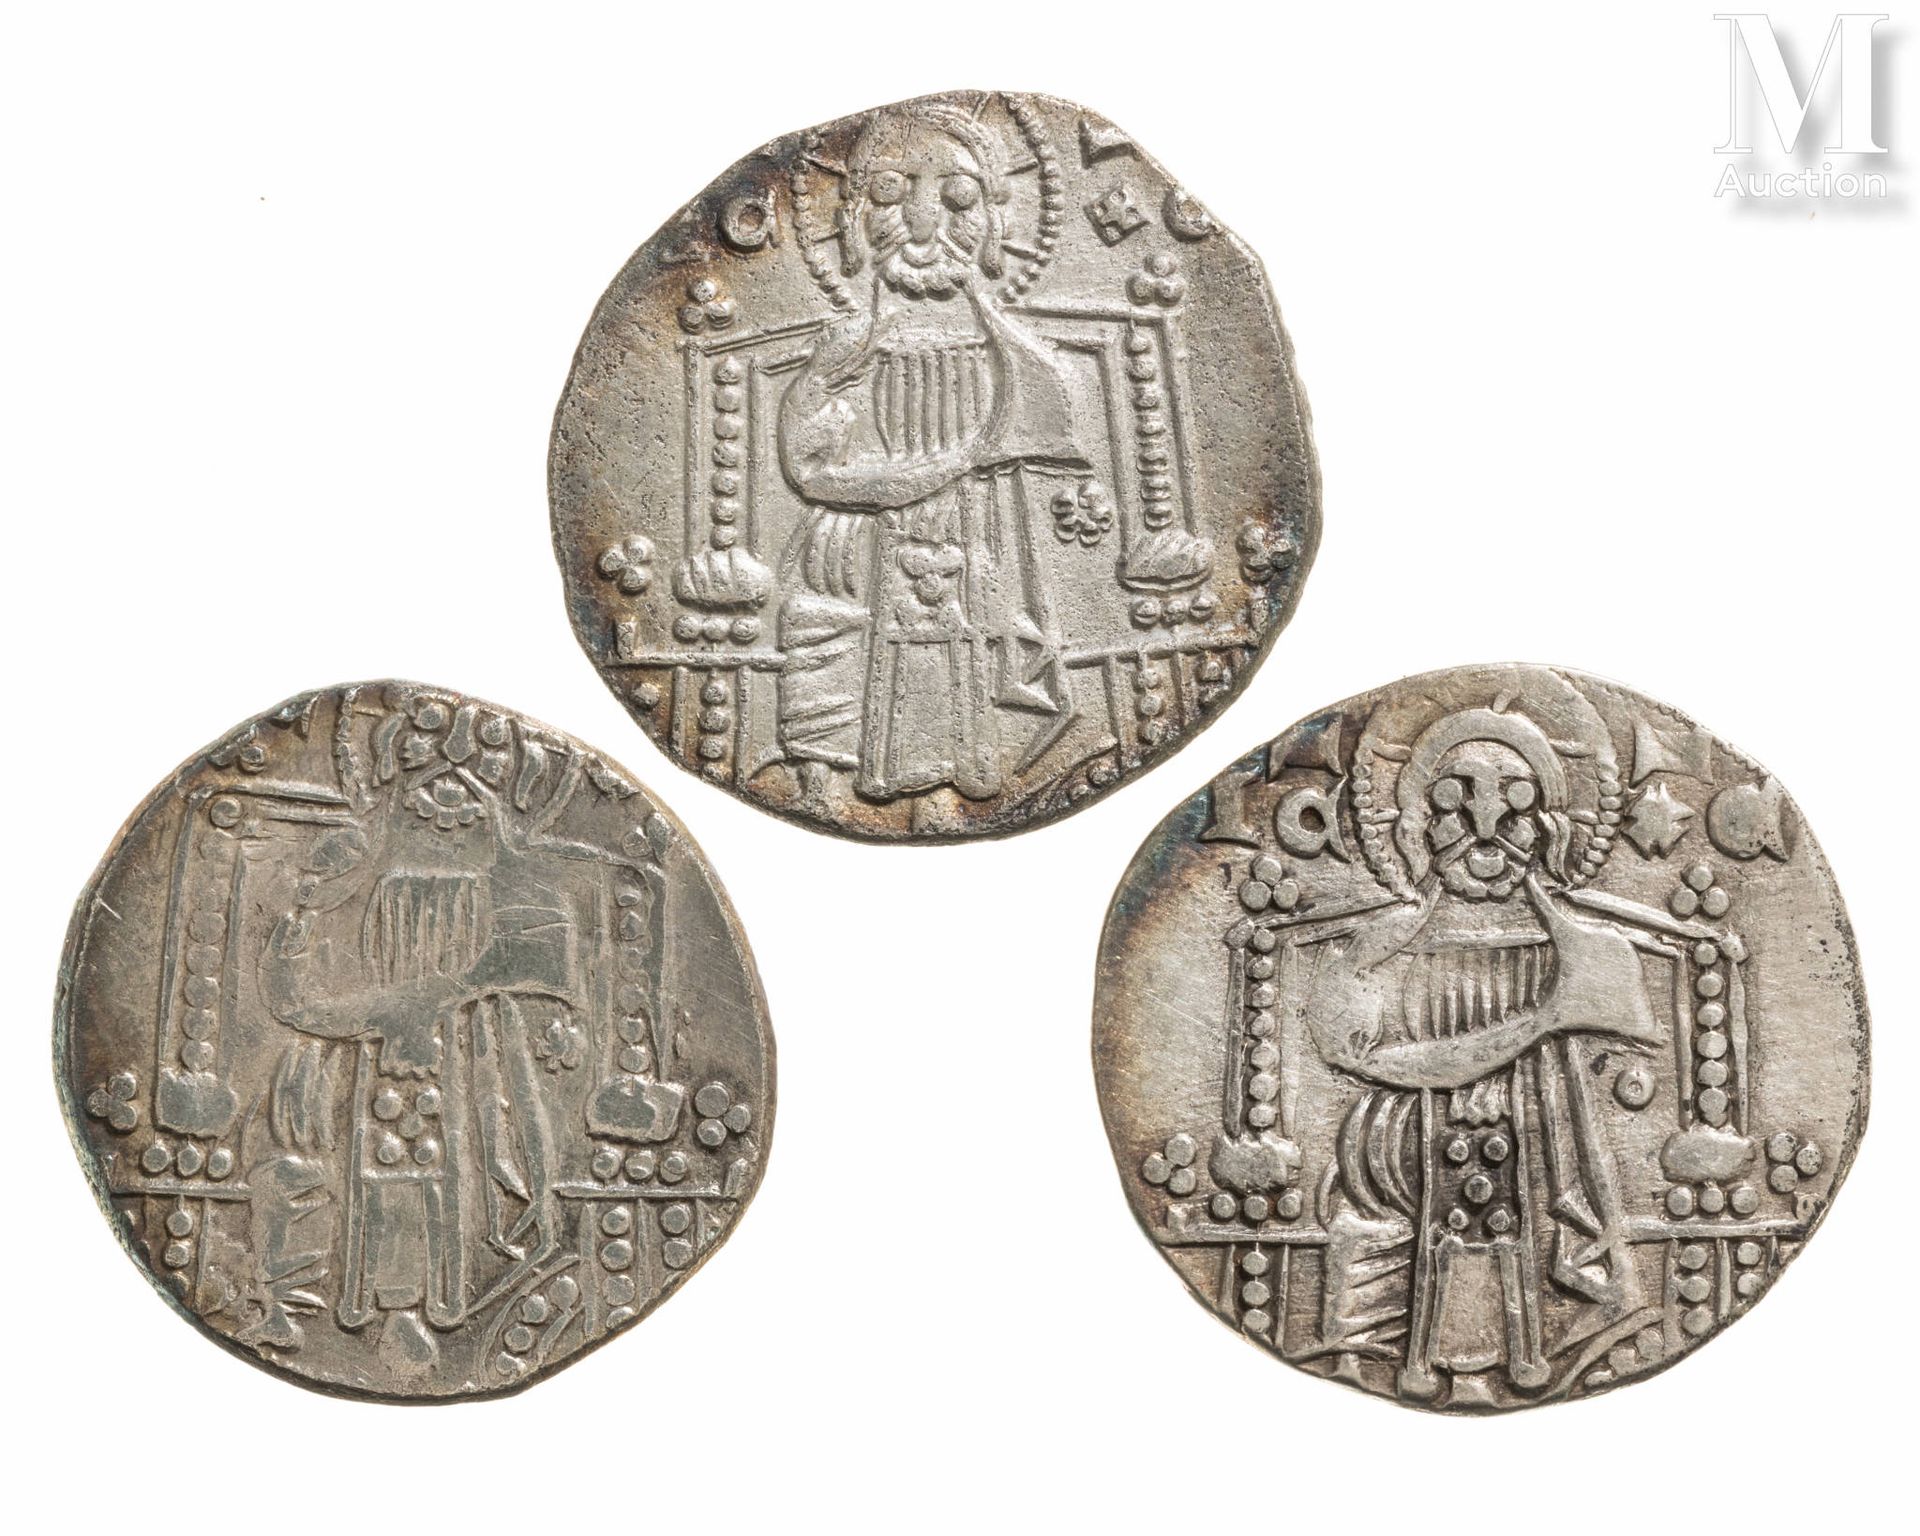 Venise - Giovanni Saranzo (1312-1328) Lot of three grossi
A: The doge and Saint &hellip;